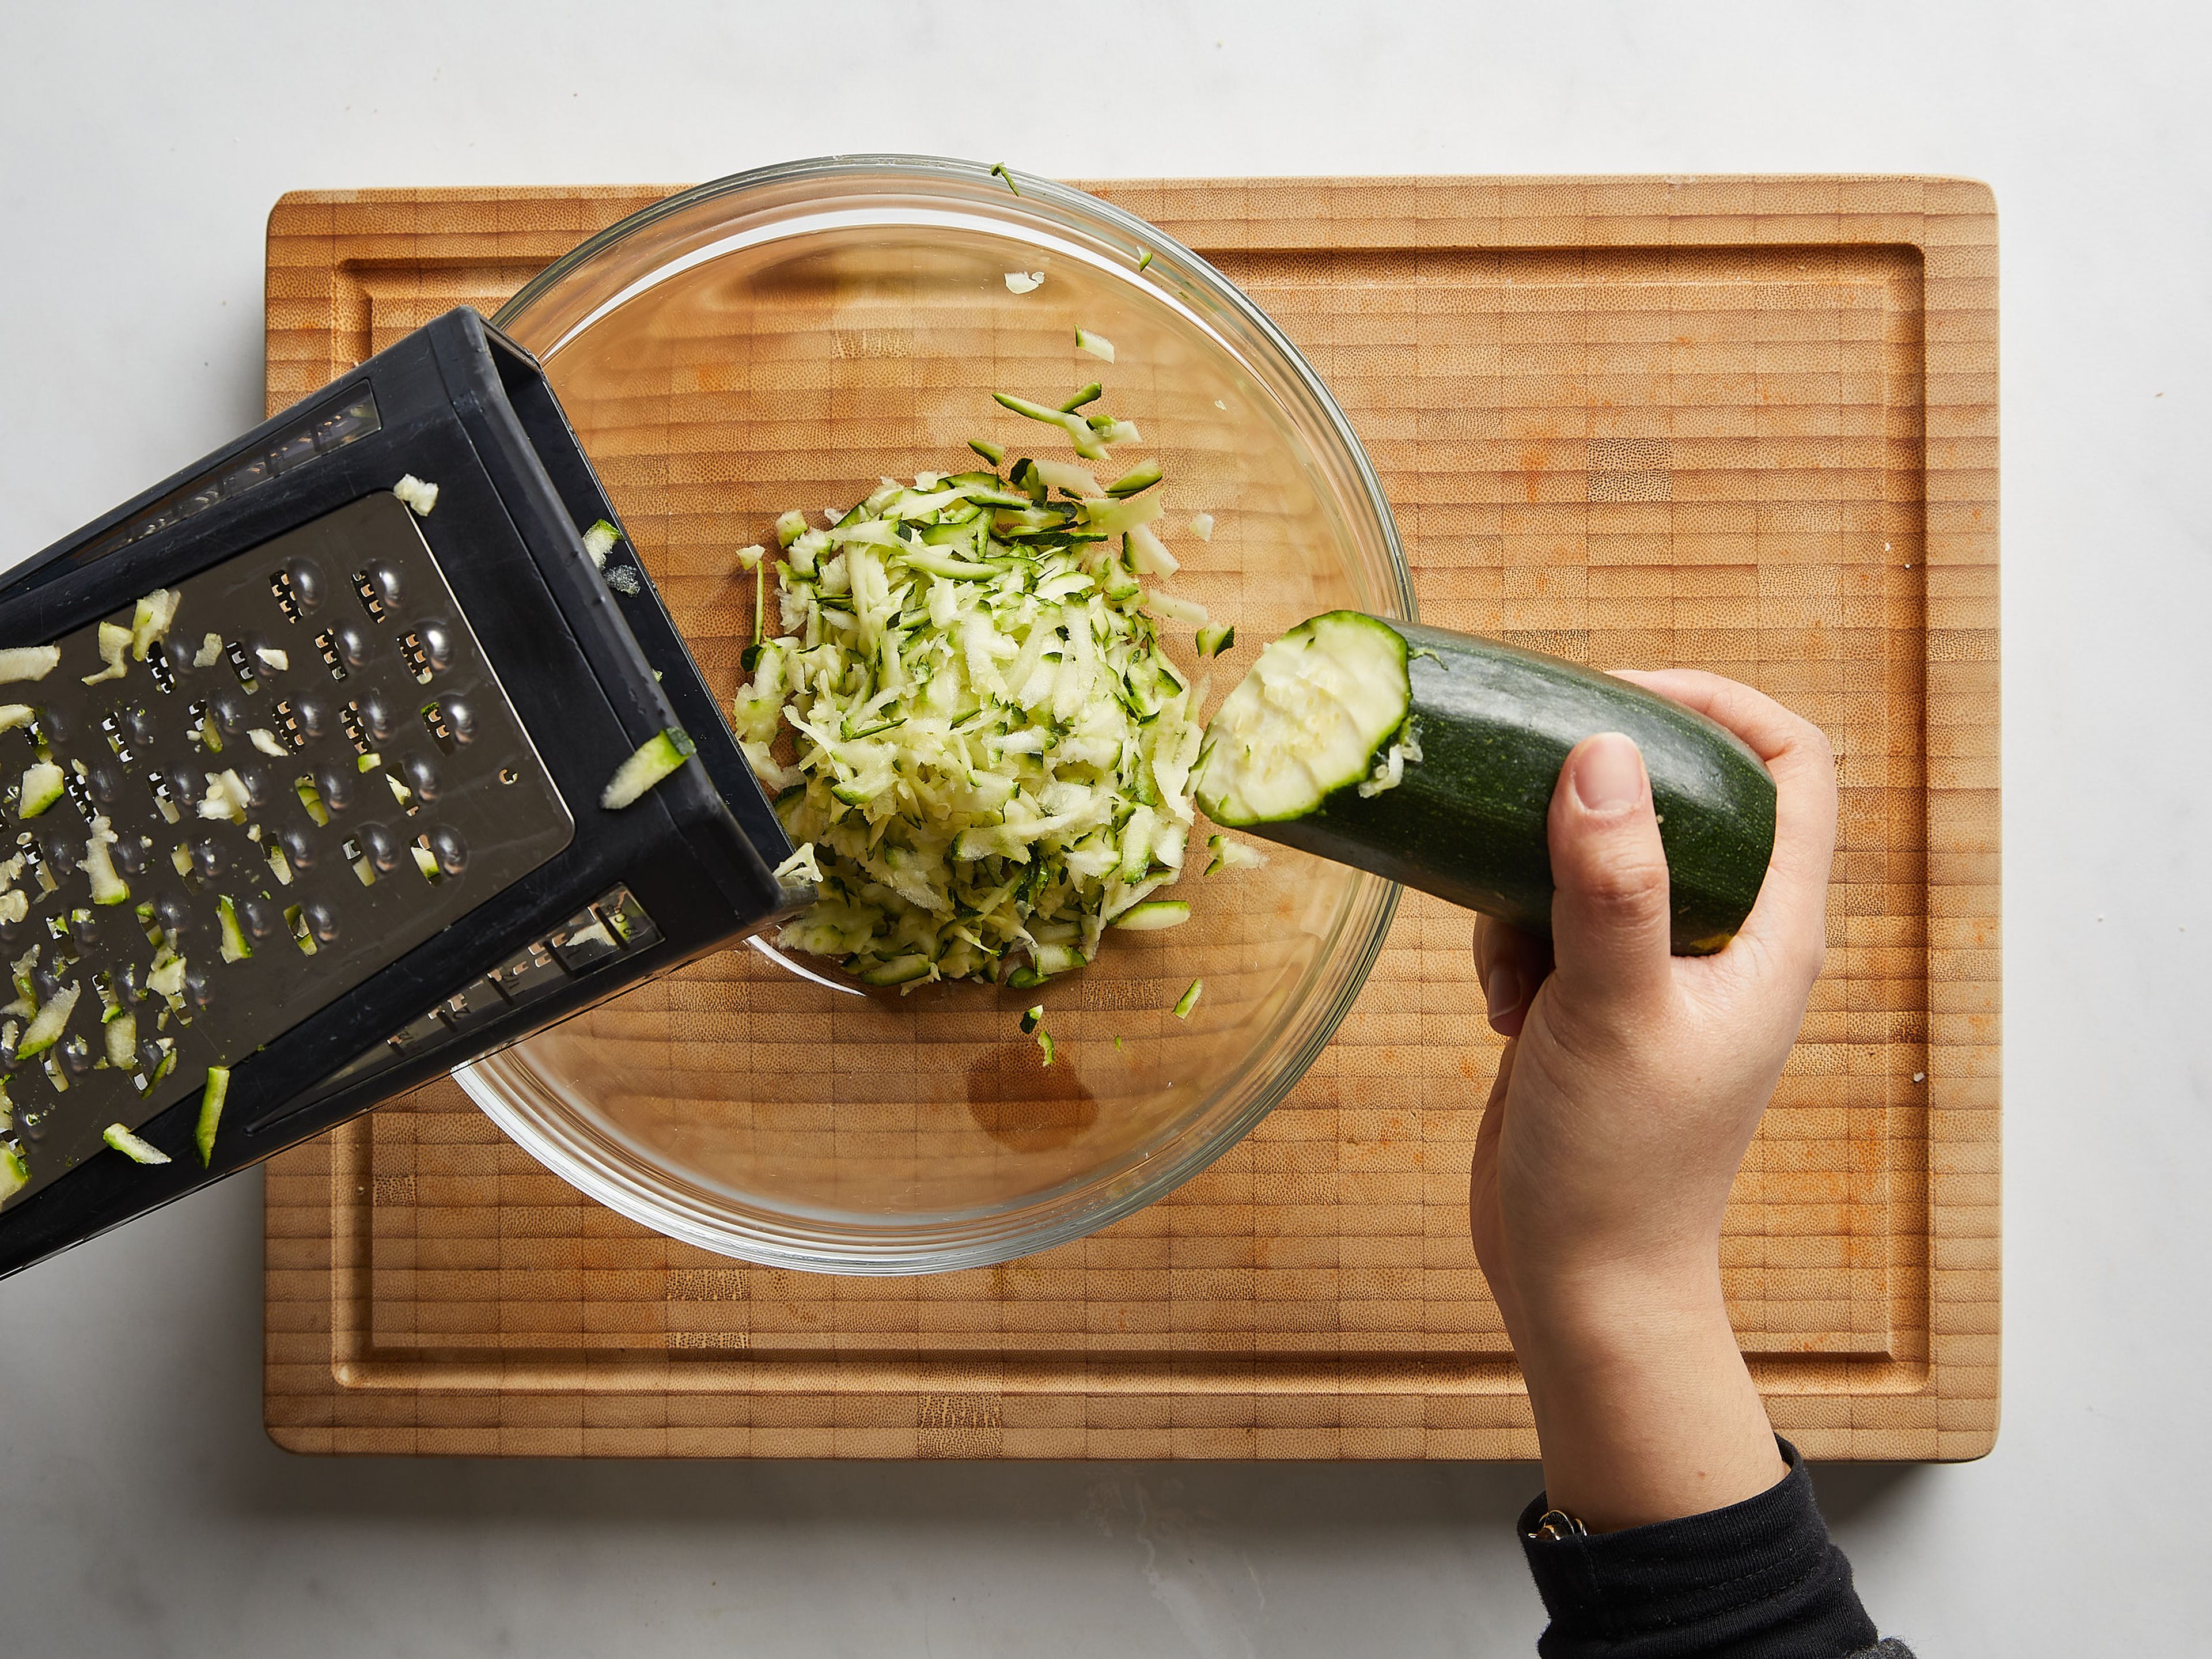 Set a large pot of water to boil over medium-high heat. Trim ends of zucchini, and use the large holed-side of a box grater to grate the zucchini into a clean towel set inside a bowl. Use the towel to help you squeeze out as much of the extra water from the grated zucchini; discarding the liquid. Zest and juice lemon. Pluck mint leaves and thinly slice. Crumble feta cheese into a bowl.